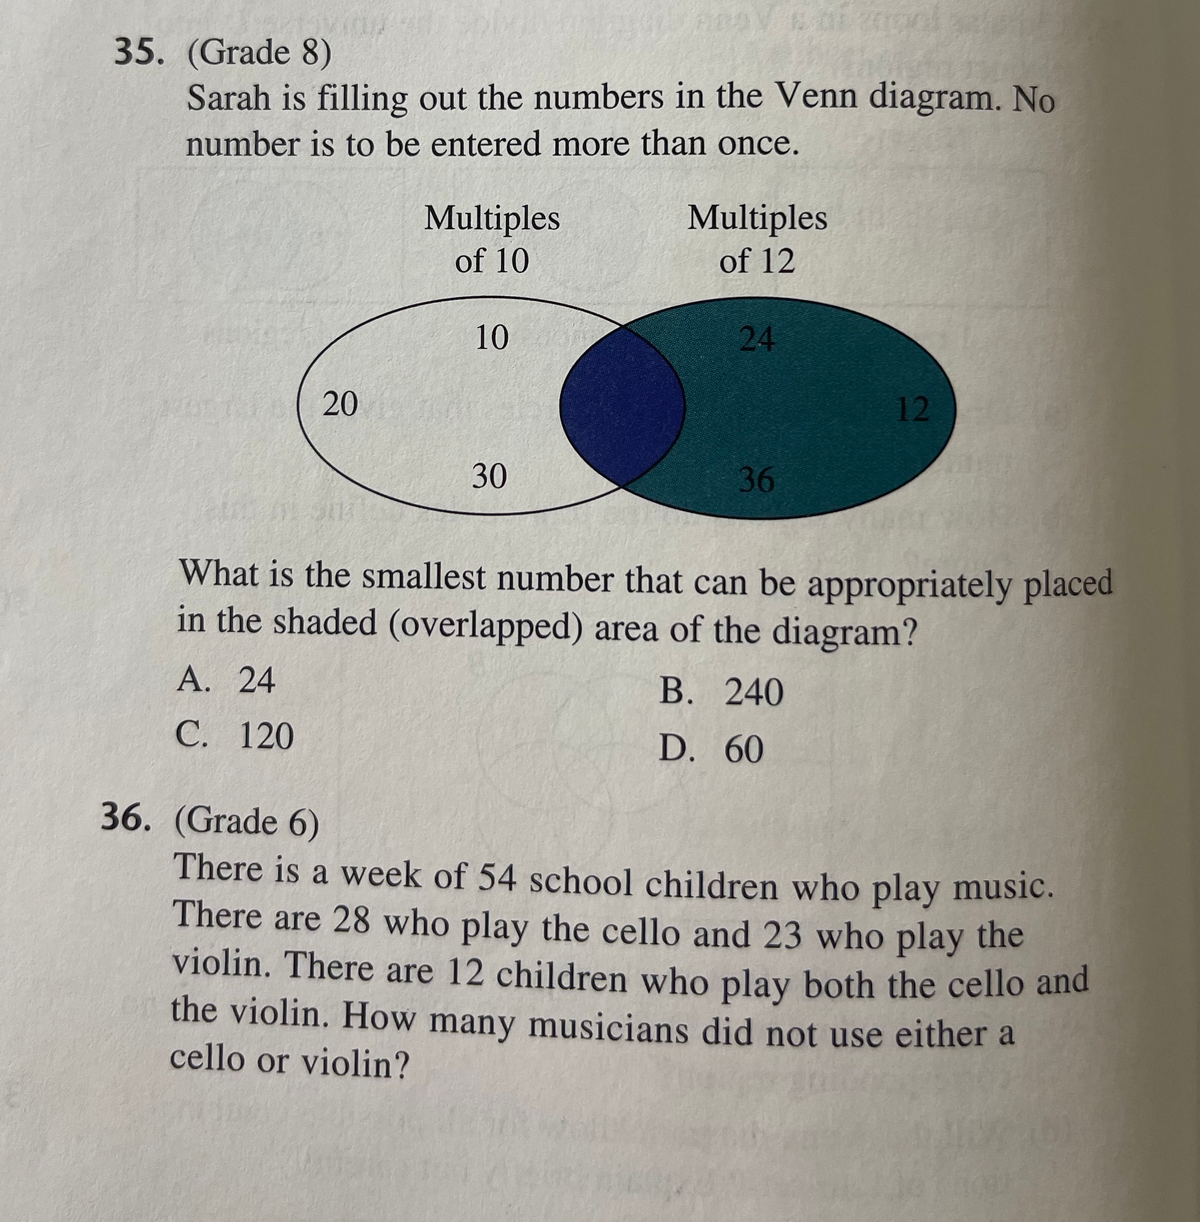 35. (Grade 8)
Sarah is filling out the numbers in the Venn diagram. No
number is to be entered more than once.
Multiples
Multiples
of 10
of 12
10
24
20
12
30
36
What is the smallest number that can be appropriately placed
in the shaded (overlapped) area of the diagram?
А. 24
В. 240
С. 120
D. 60
36. (Grade 6)
There is a week of 54 school children who play music.
There are 28 who play the cello and 23 who play the
violin. There are 12 children who play both the cello and
the violin. How many musicians did not use either a
cello or violin?
